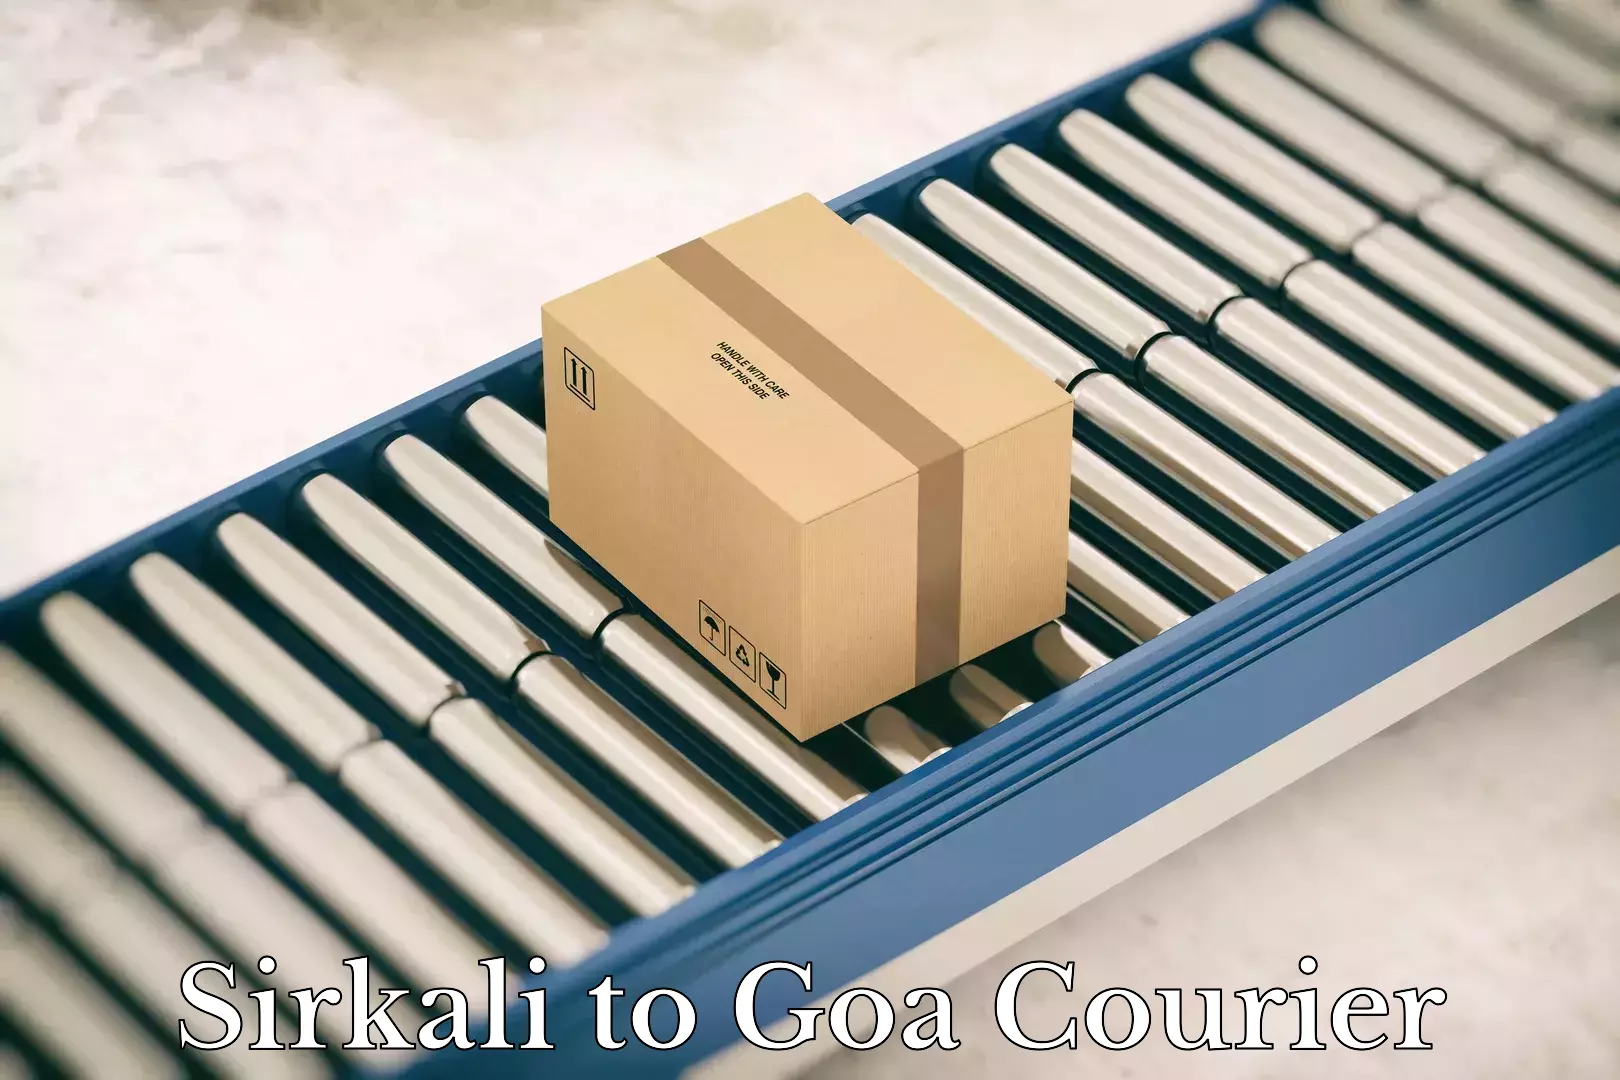 Large-scale shipping solutions Sirkali to Goa